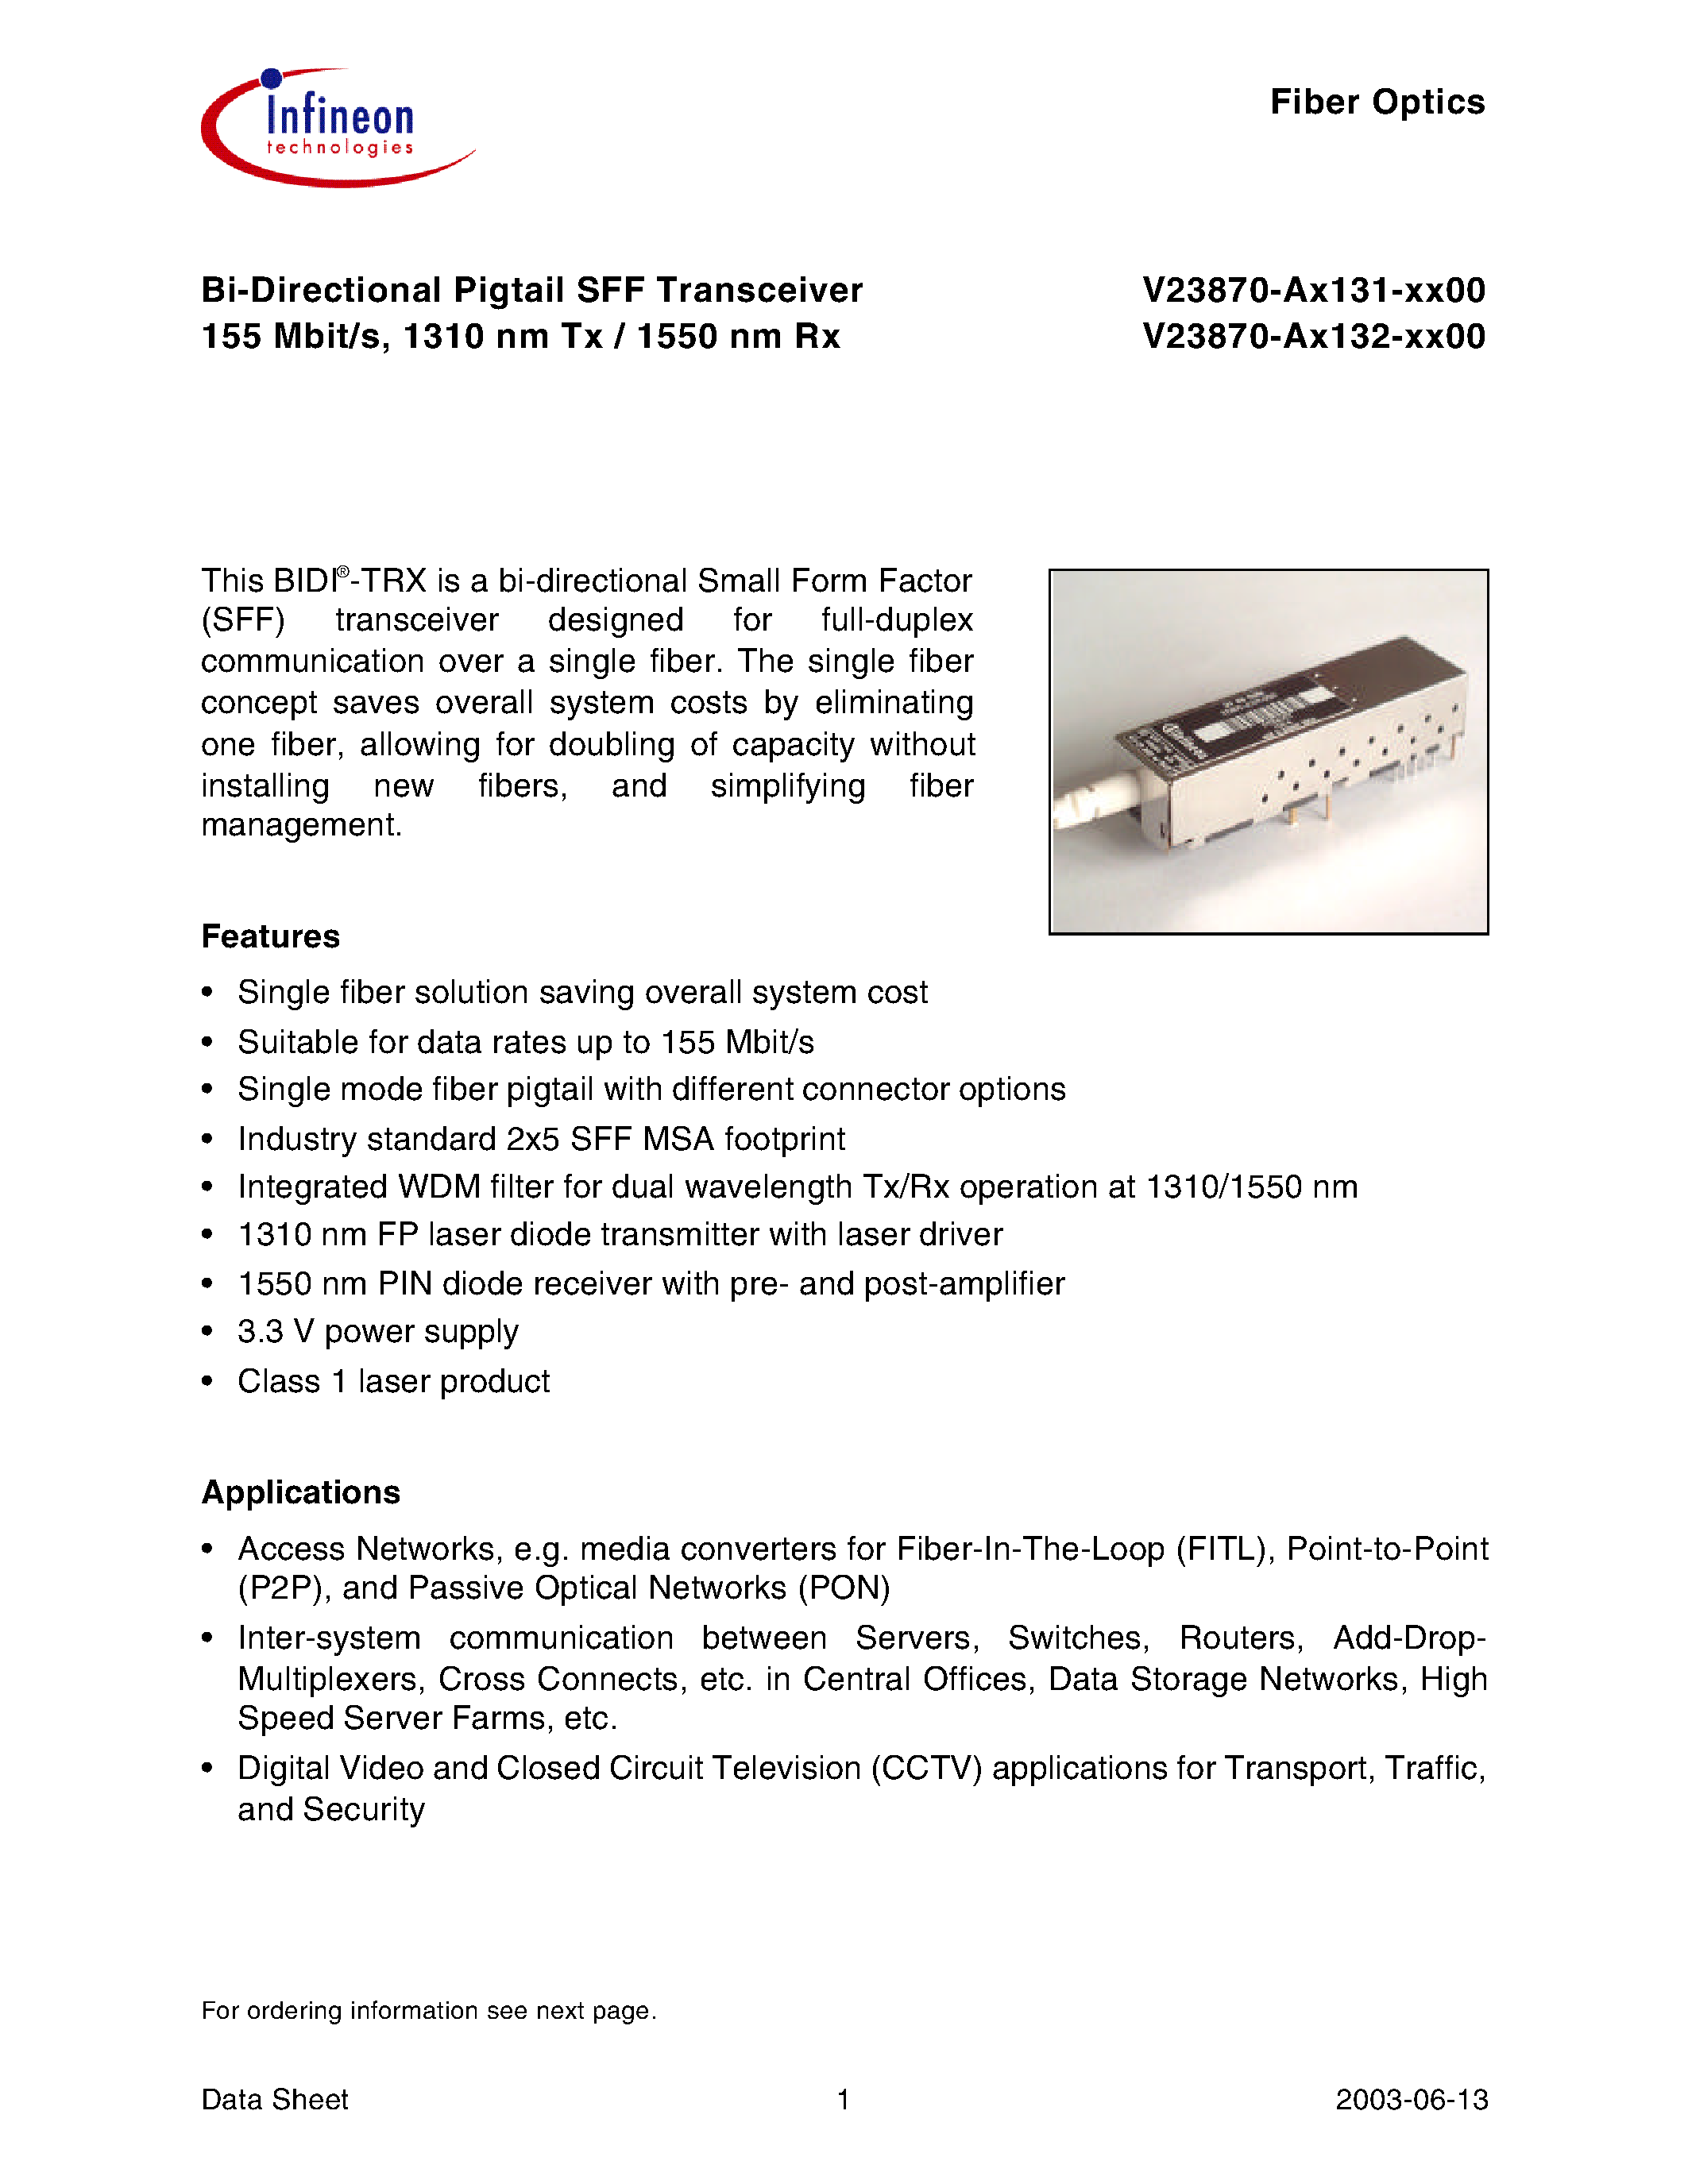 Datasheet V23870-A1132-K500 - Bi-Directional Pigtail SFF Transceiver 155 Mbit/s/ 1310 nm Tx / 1550 nm Rx page 1